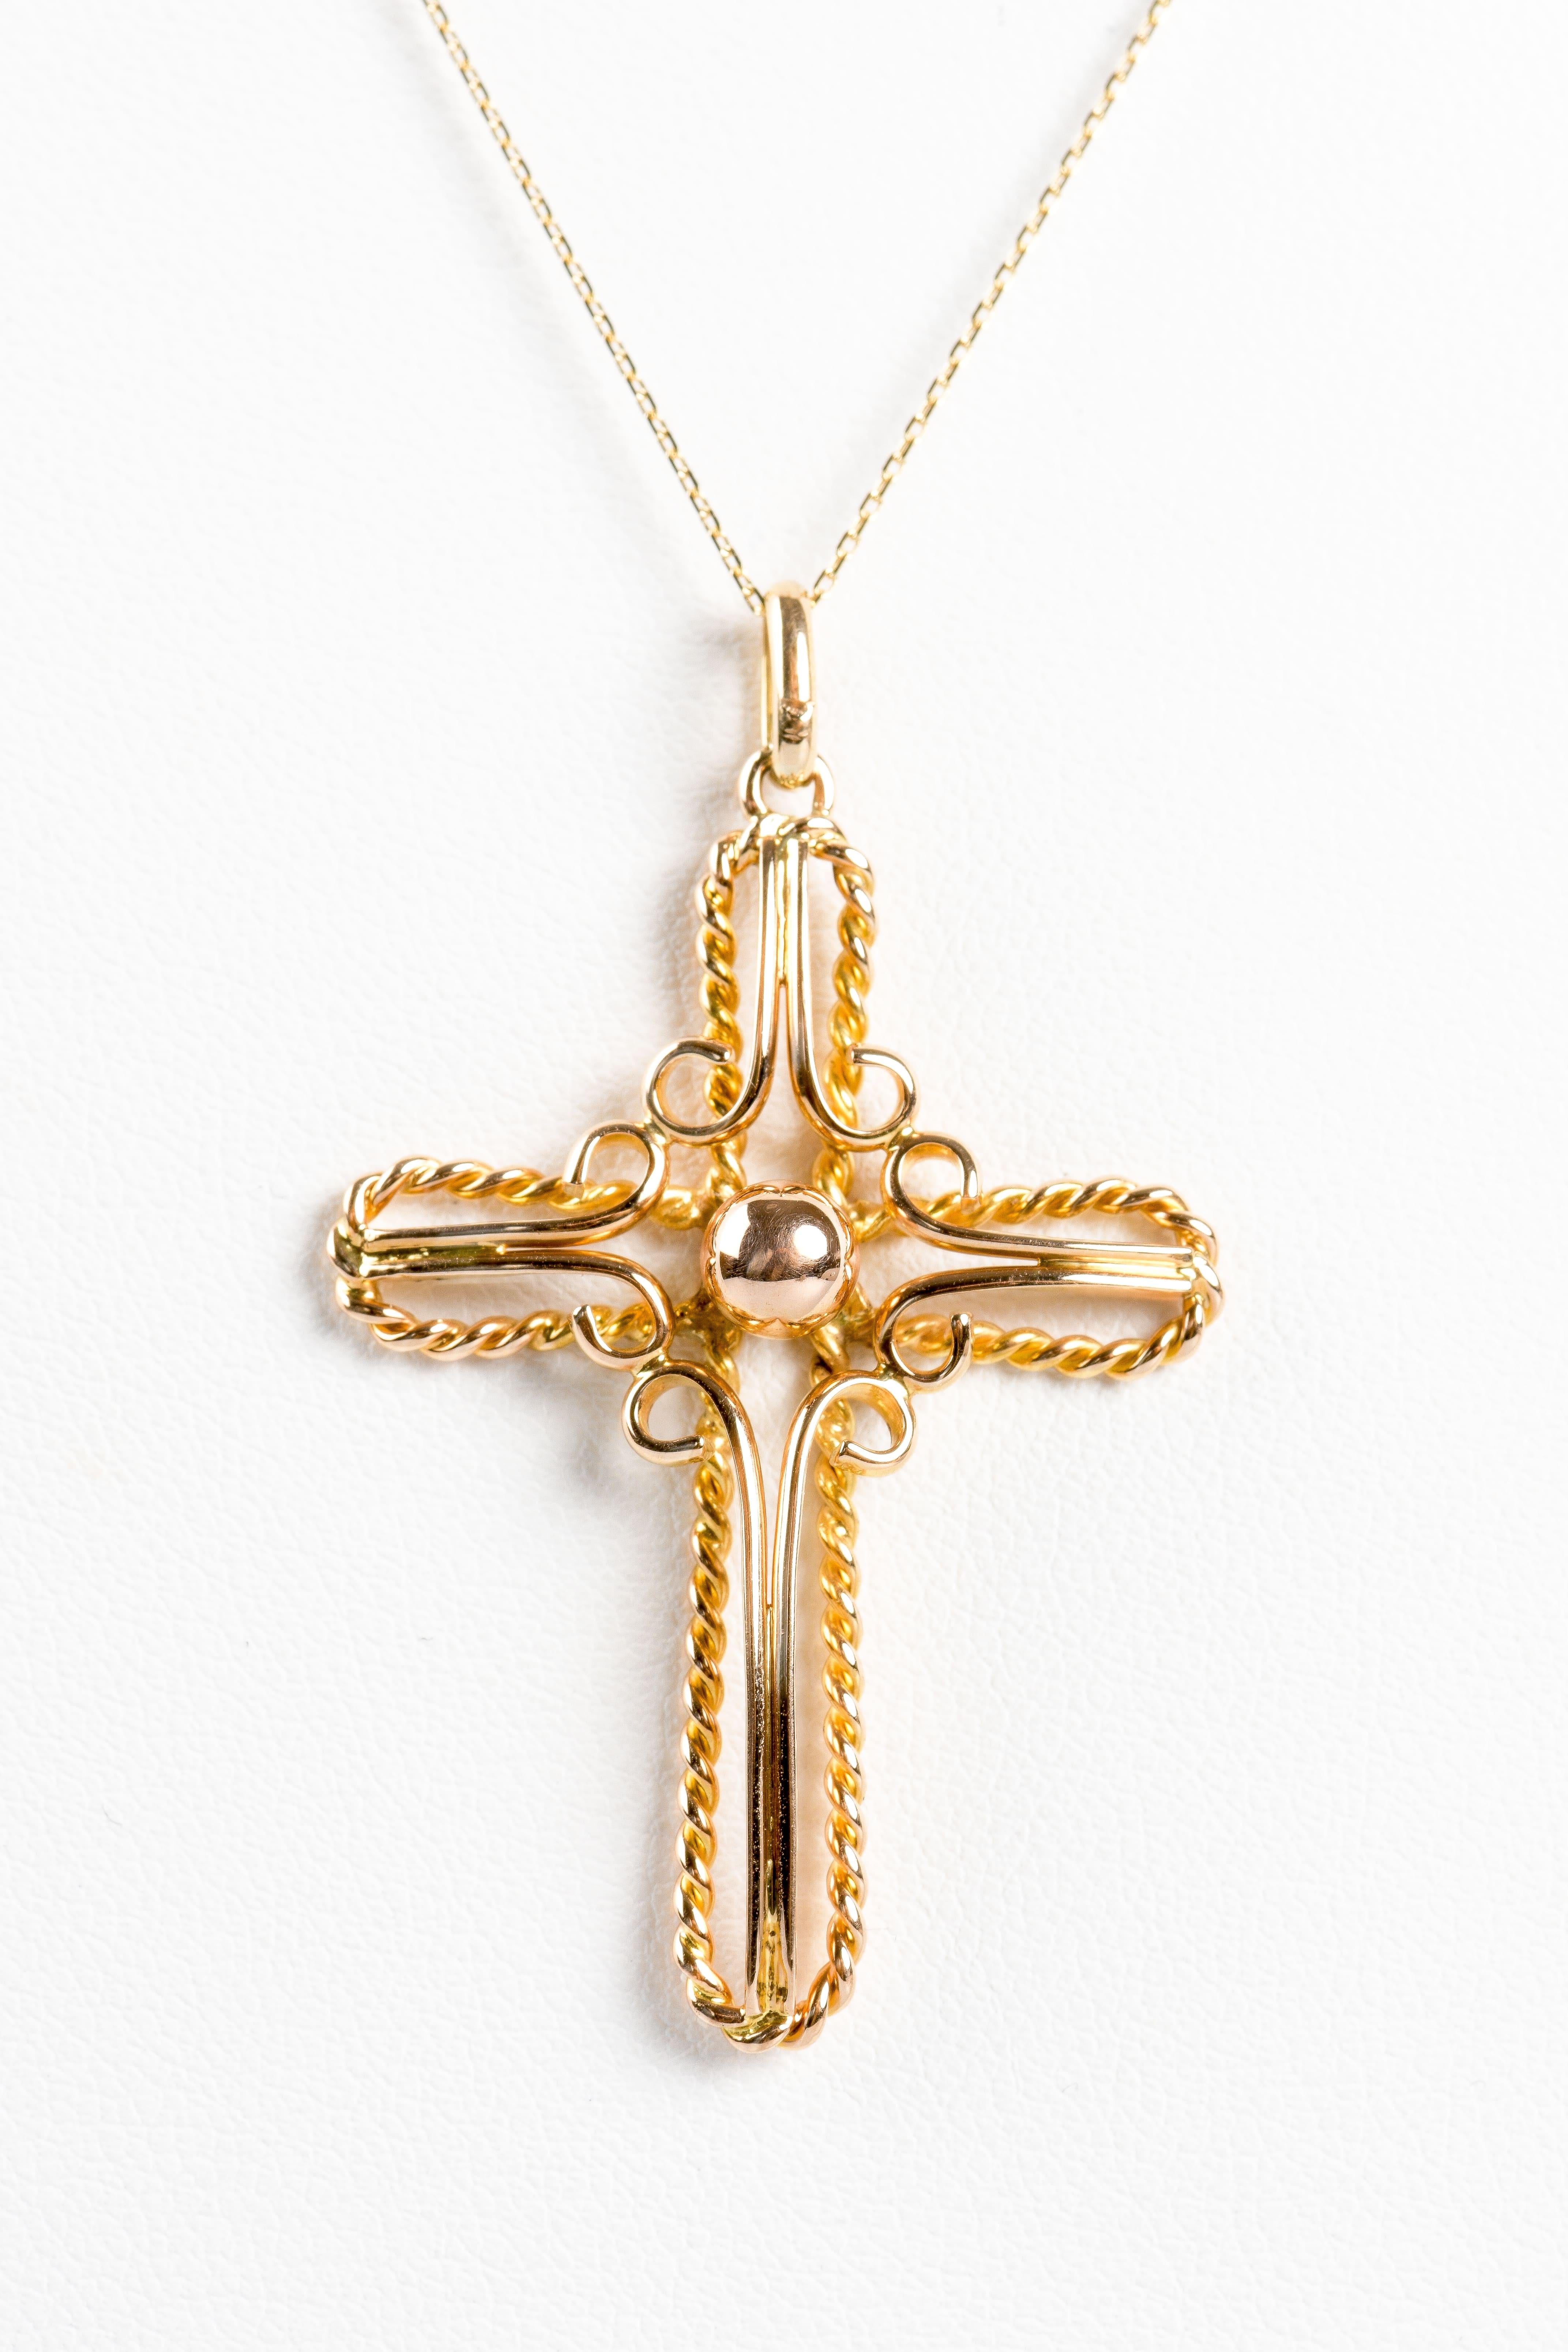 Women's or Men's Knitted necklace with cross-shaped pendant in 18K yellow gold.  For Sale